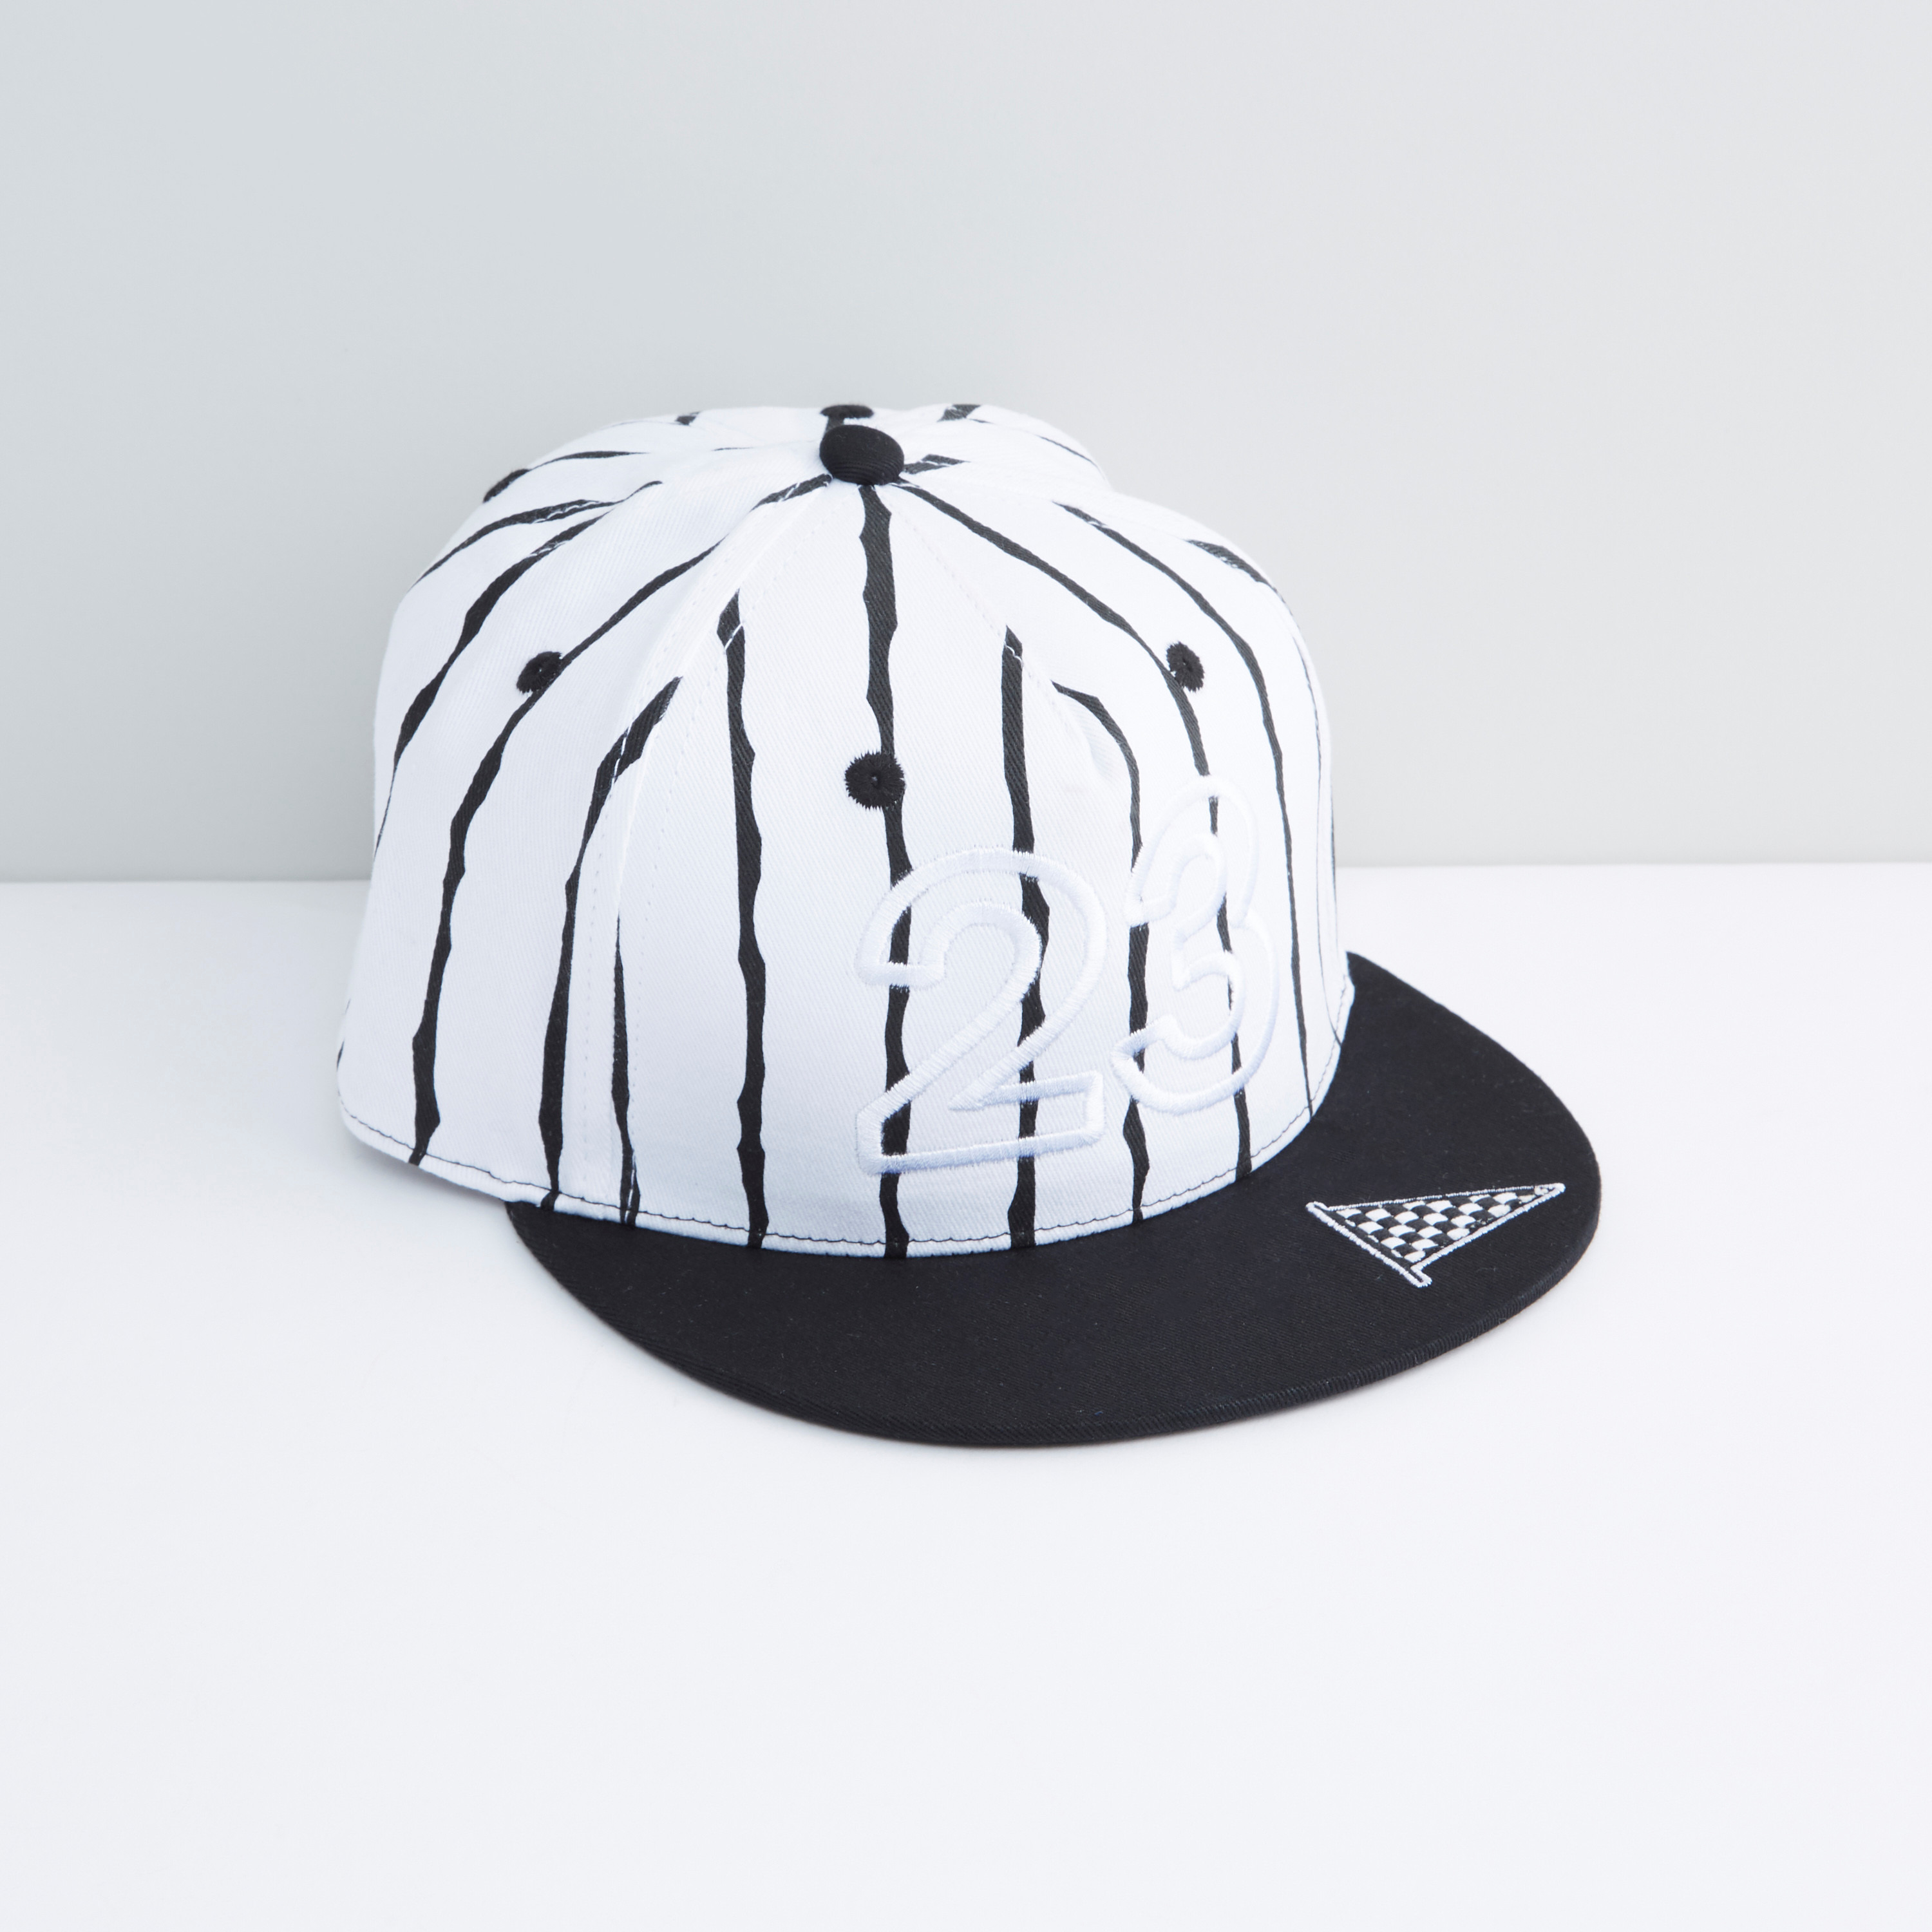 Shop Striped and Embroidered Baseball Cap Online Max Qatar